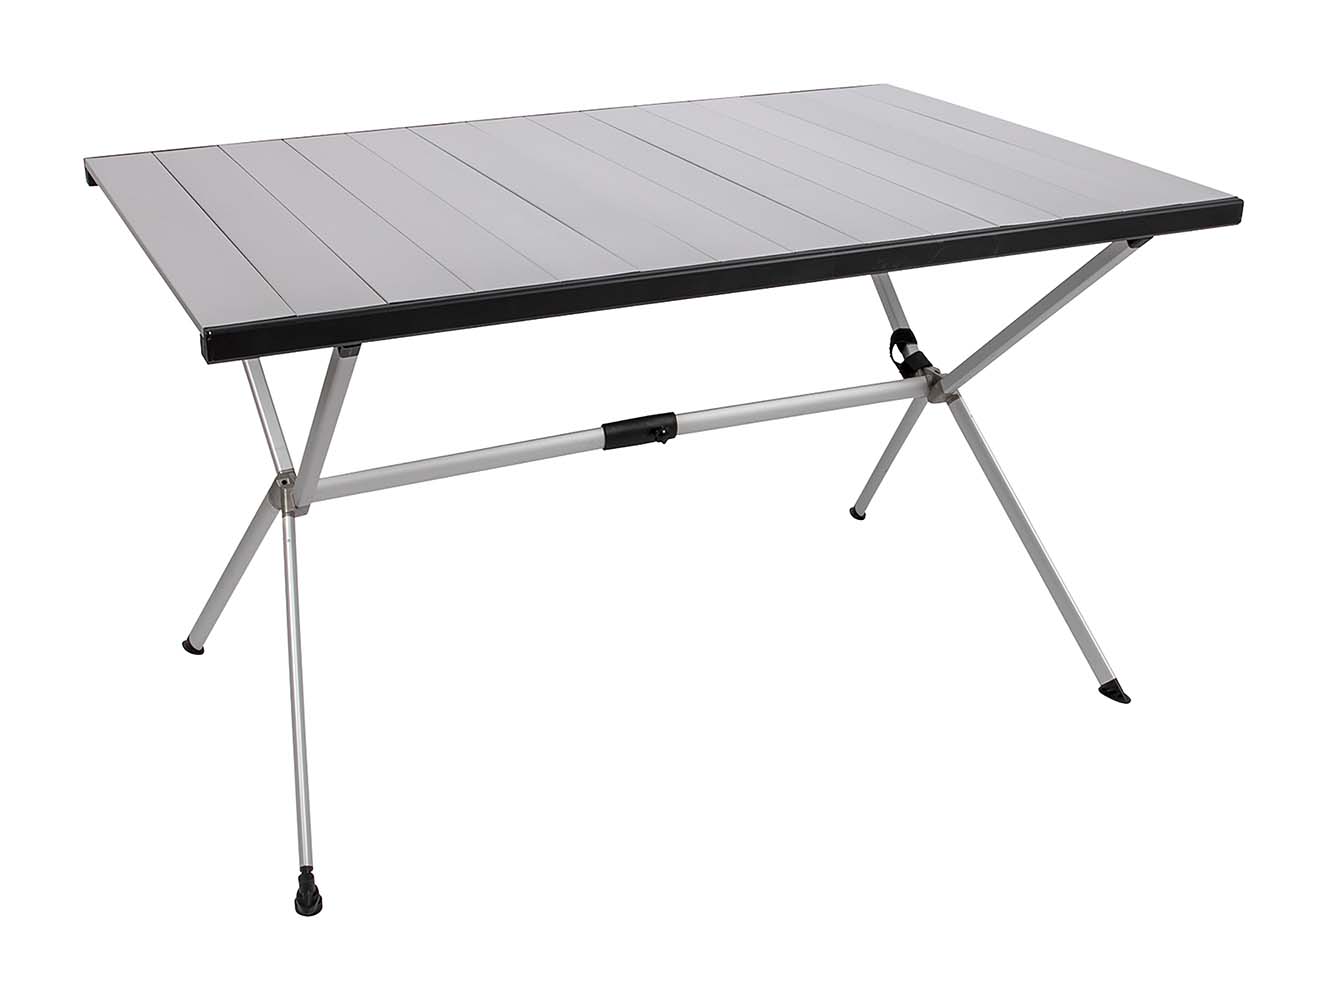 1404438 A very stable, alumunium cross leg table. This table is fully foldable and convenient to carry. The table top can be rolled up completely. Also the the legs can be folded.